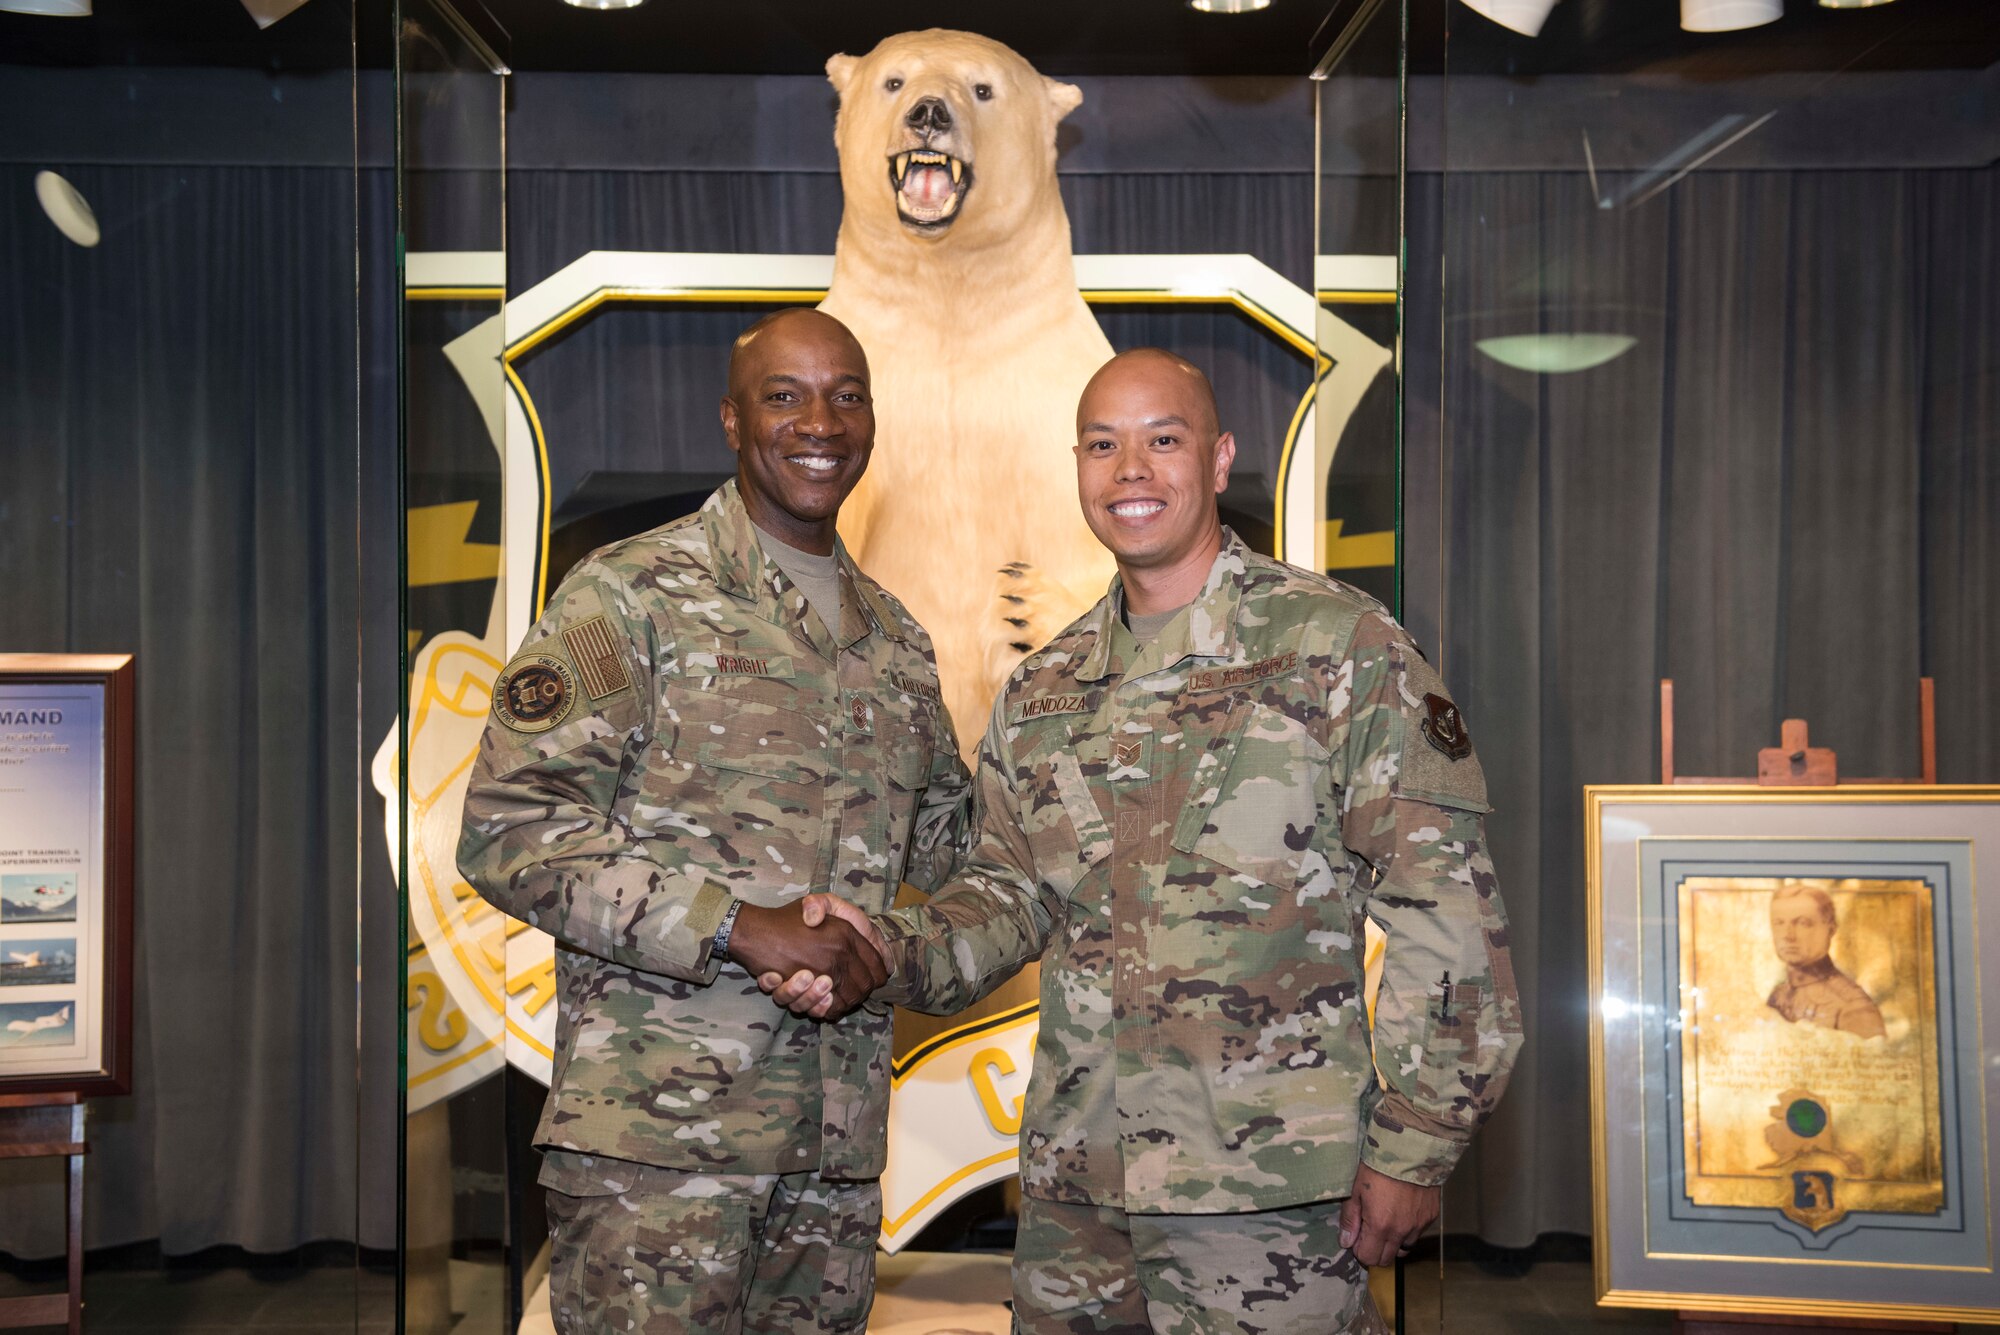 U.S. Air Force Tech. Sgt. Dennis Mendoza, 673d Air Base Wing noncommissioned officer in charge of executive administration, receives a coin from Chief Master Sergeant of the Air Force Kaleth O. Wright, at Alaskan Command, Joint Base Elmendorf-Richardson, Alaska, June 10, 2019. Chief Wright visited JBER during Red Flag-Alaska to meet with senior enlisted leader counterparts from throughout the Pacific. Red Flag-Alaska is a Pacific Air Forces-directed exercise that allows U.S. forces to train with coalition partners in a simulated environment.